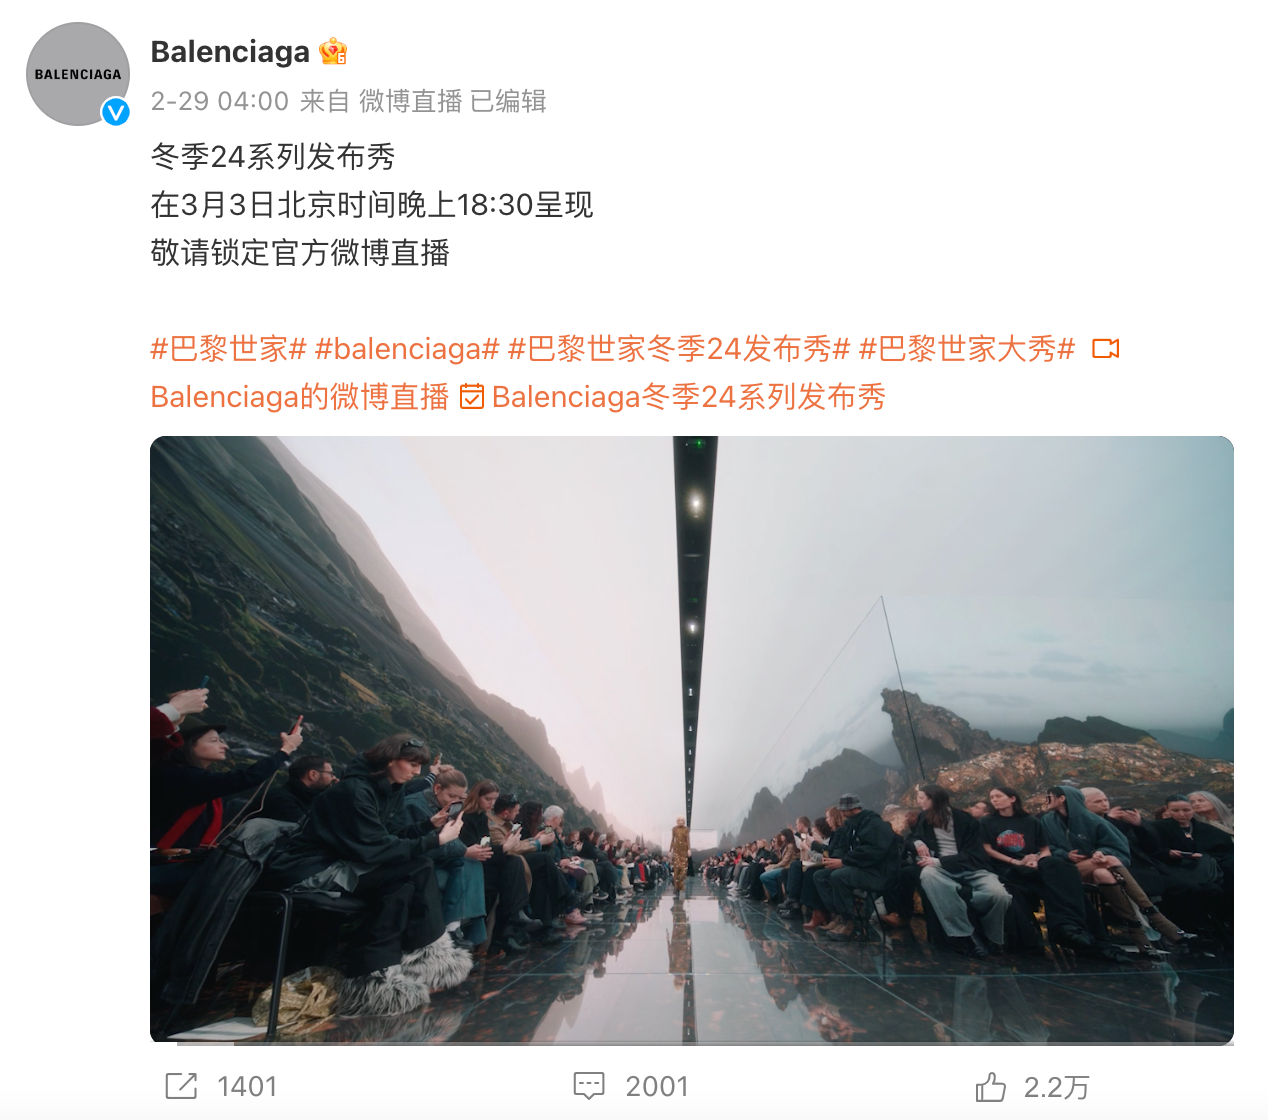 Balenciaga was one of the maisons to livestream its PFW collection via Weibo. Photo: Weibo